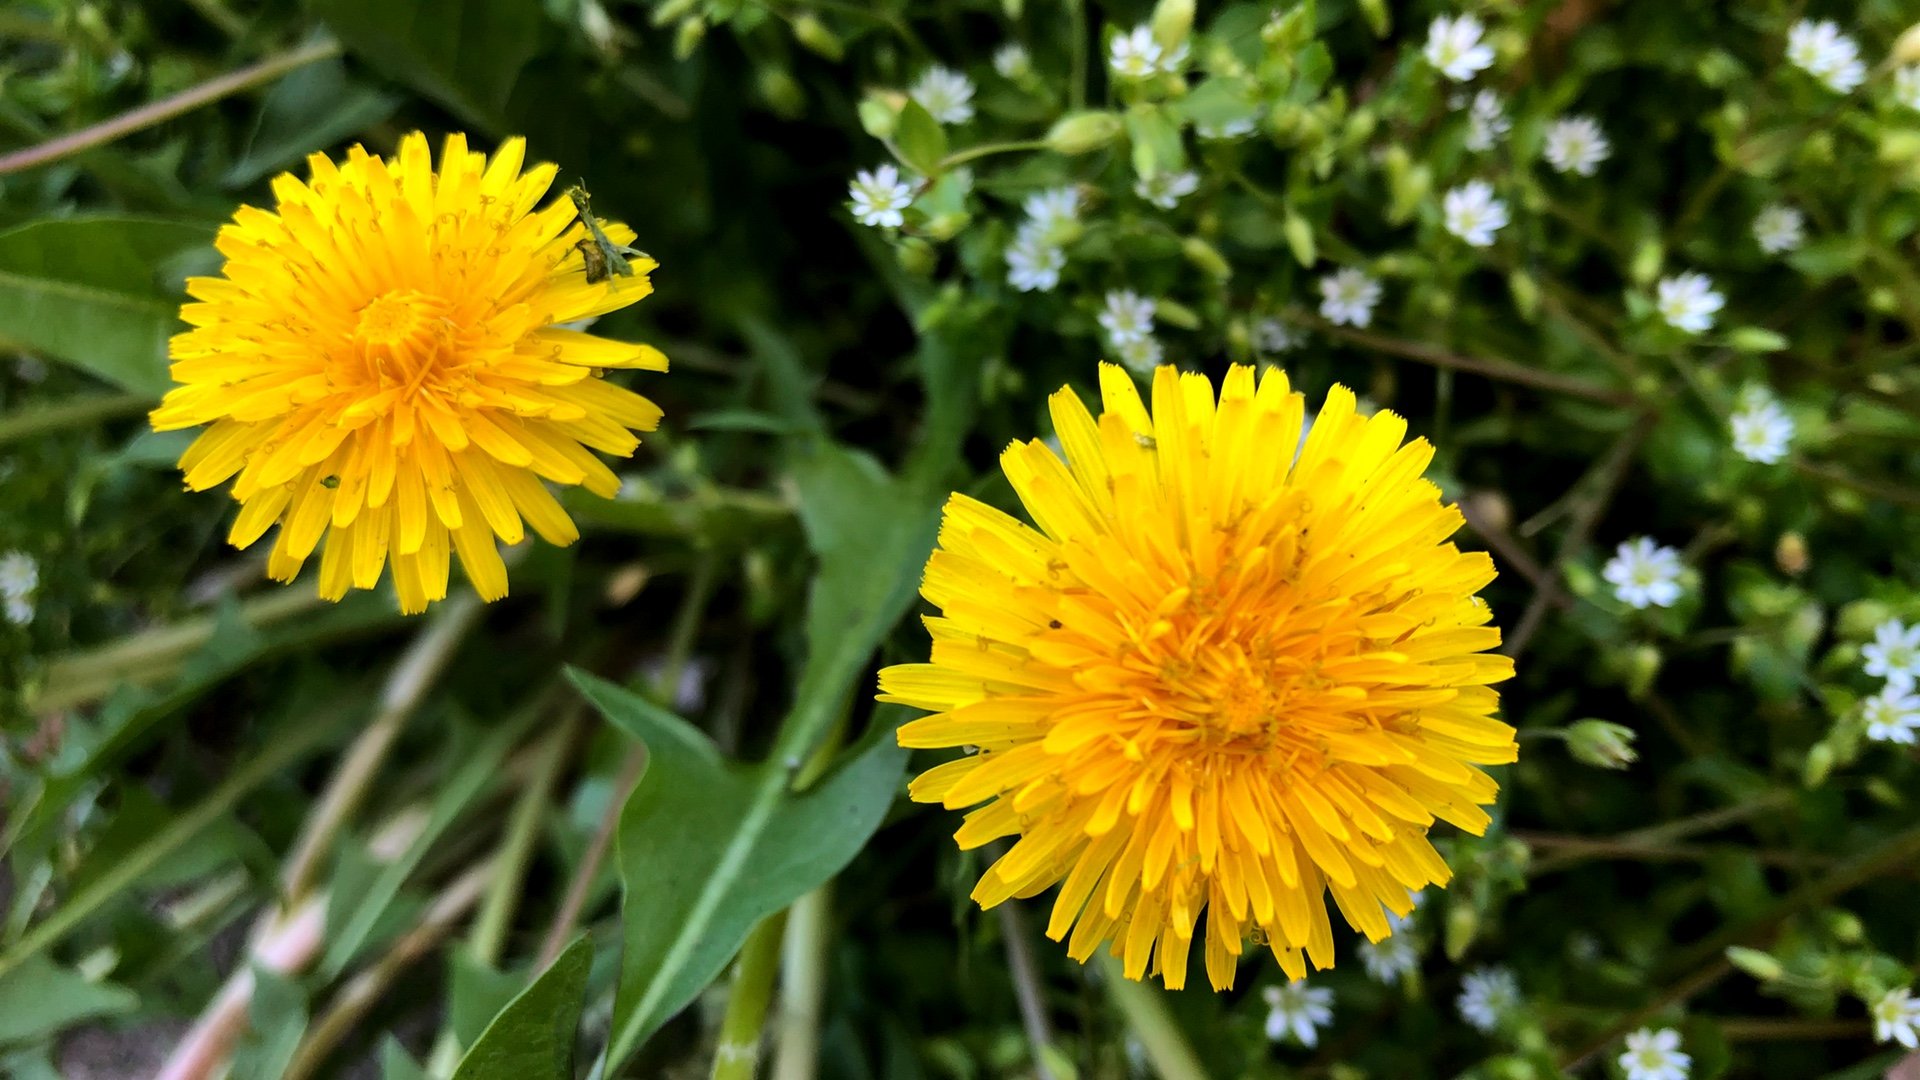 Dandelions belong to the same family as dahlias and daisies. So why are they so despised? (Patty Wetli / WTTW News)